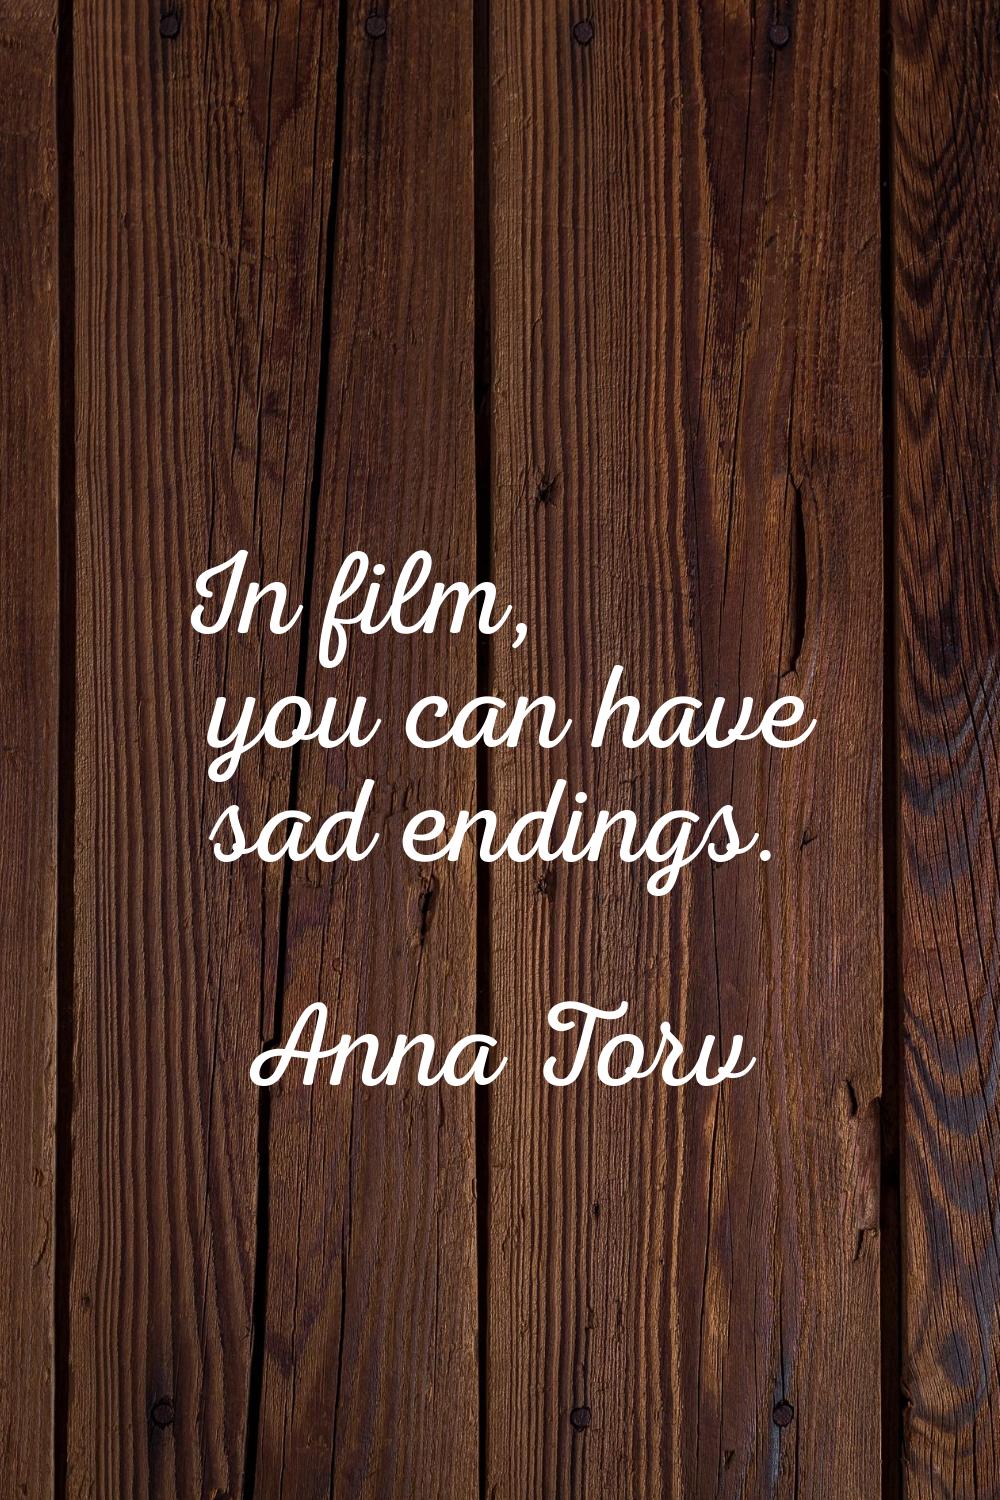 In film, you can have sad endings.